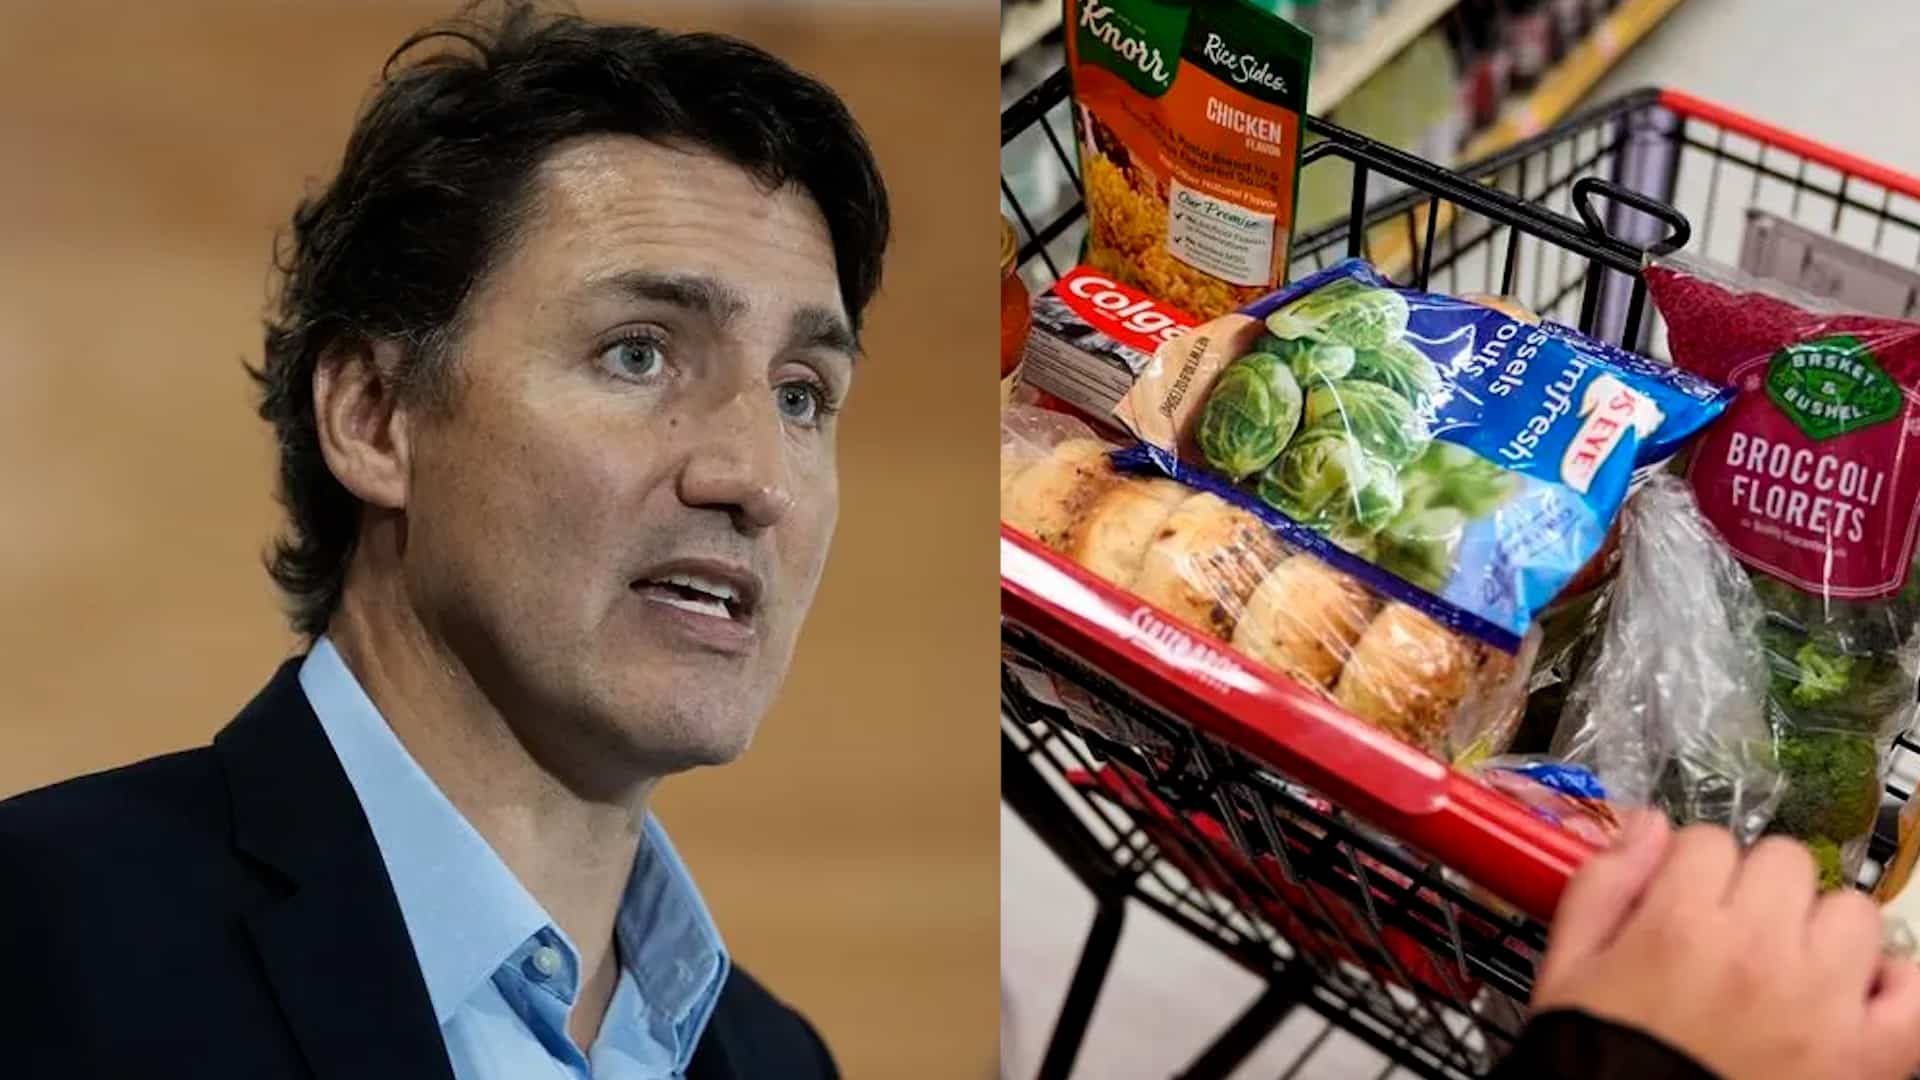 Trudeau's Policies Caused Surging Food Prices in Canada